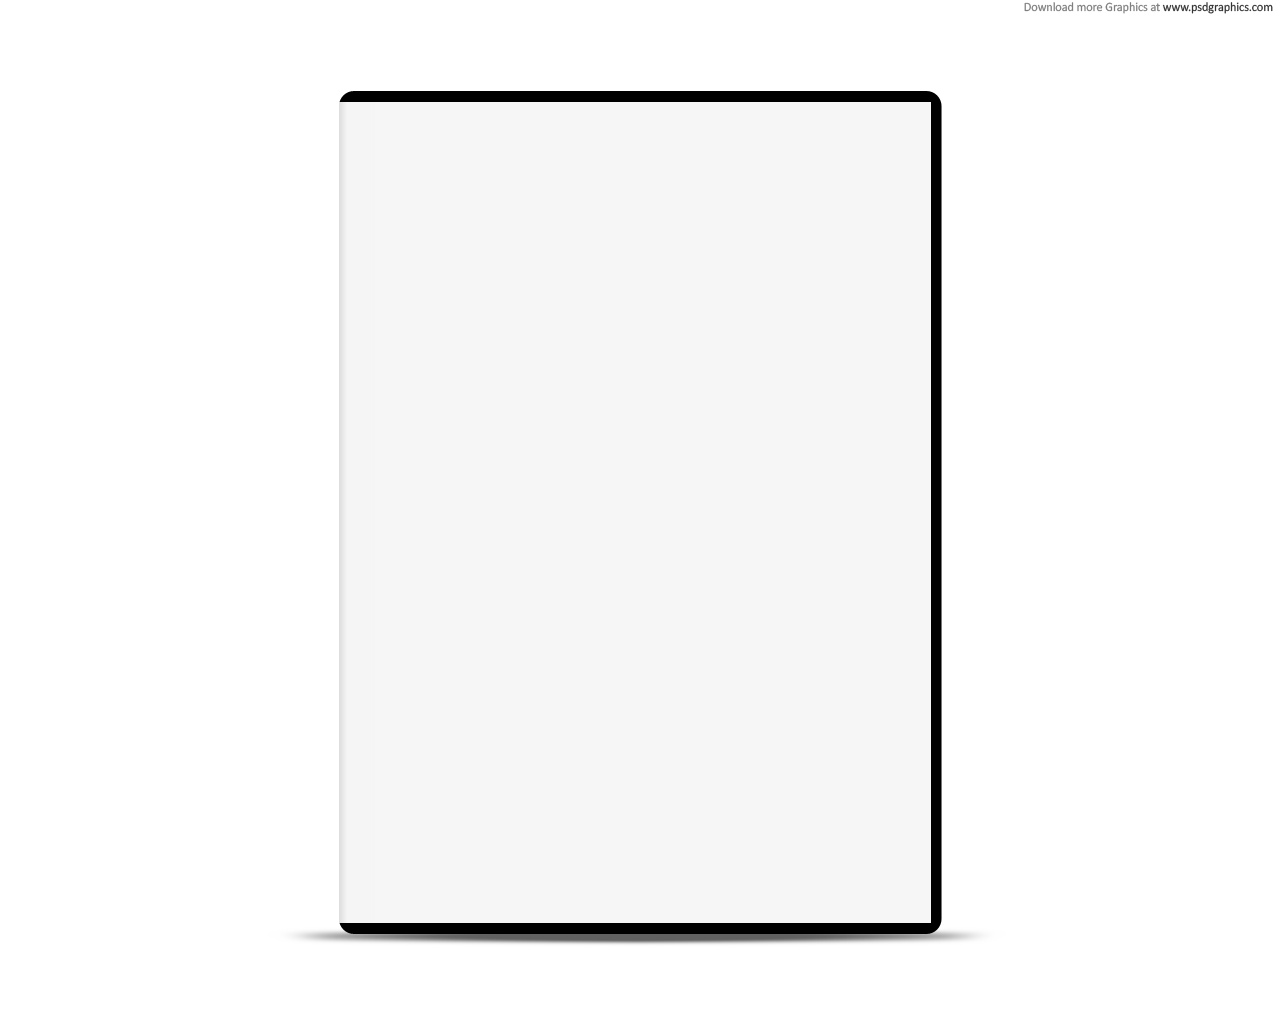 Blank DVD Case Cover Template